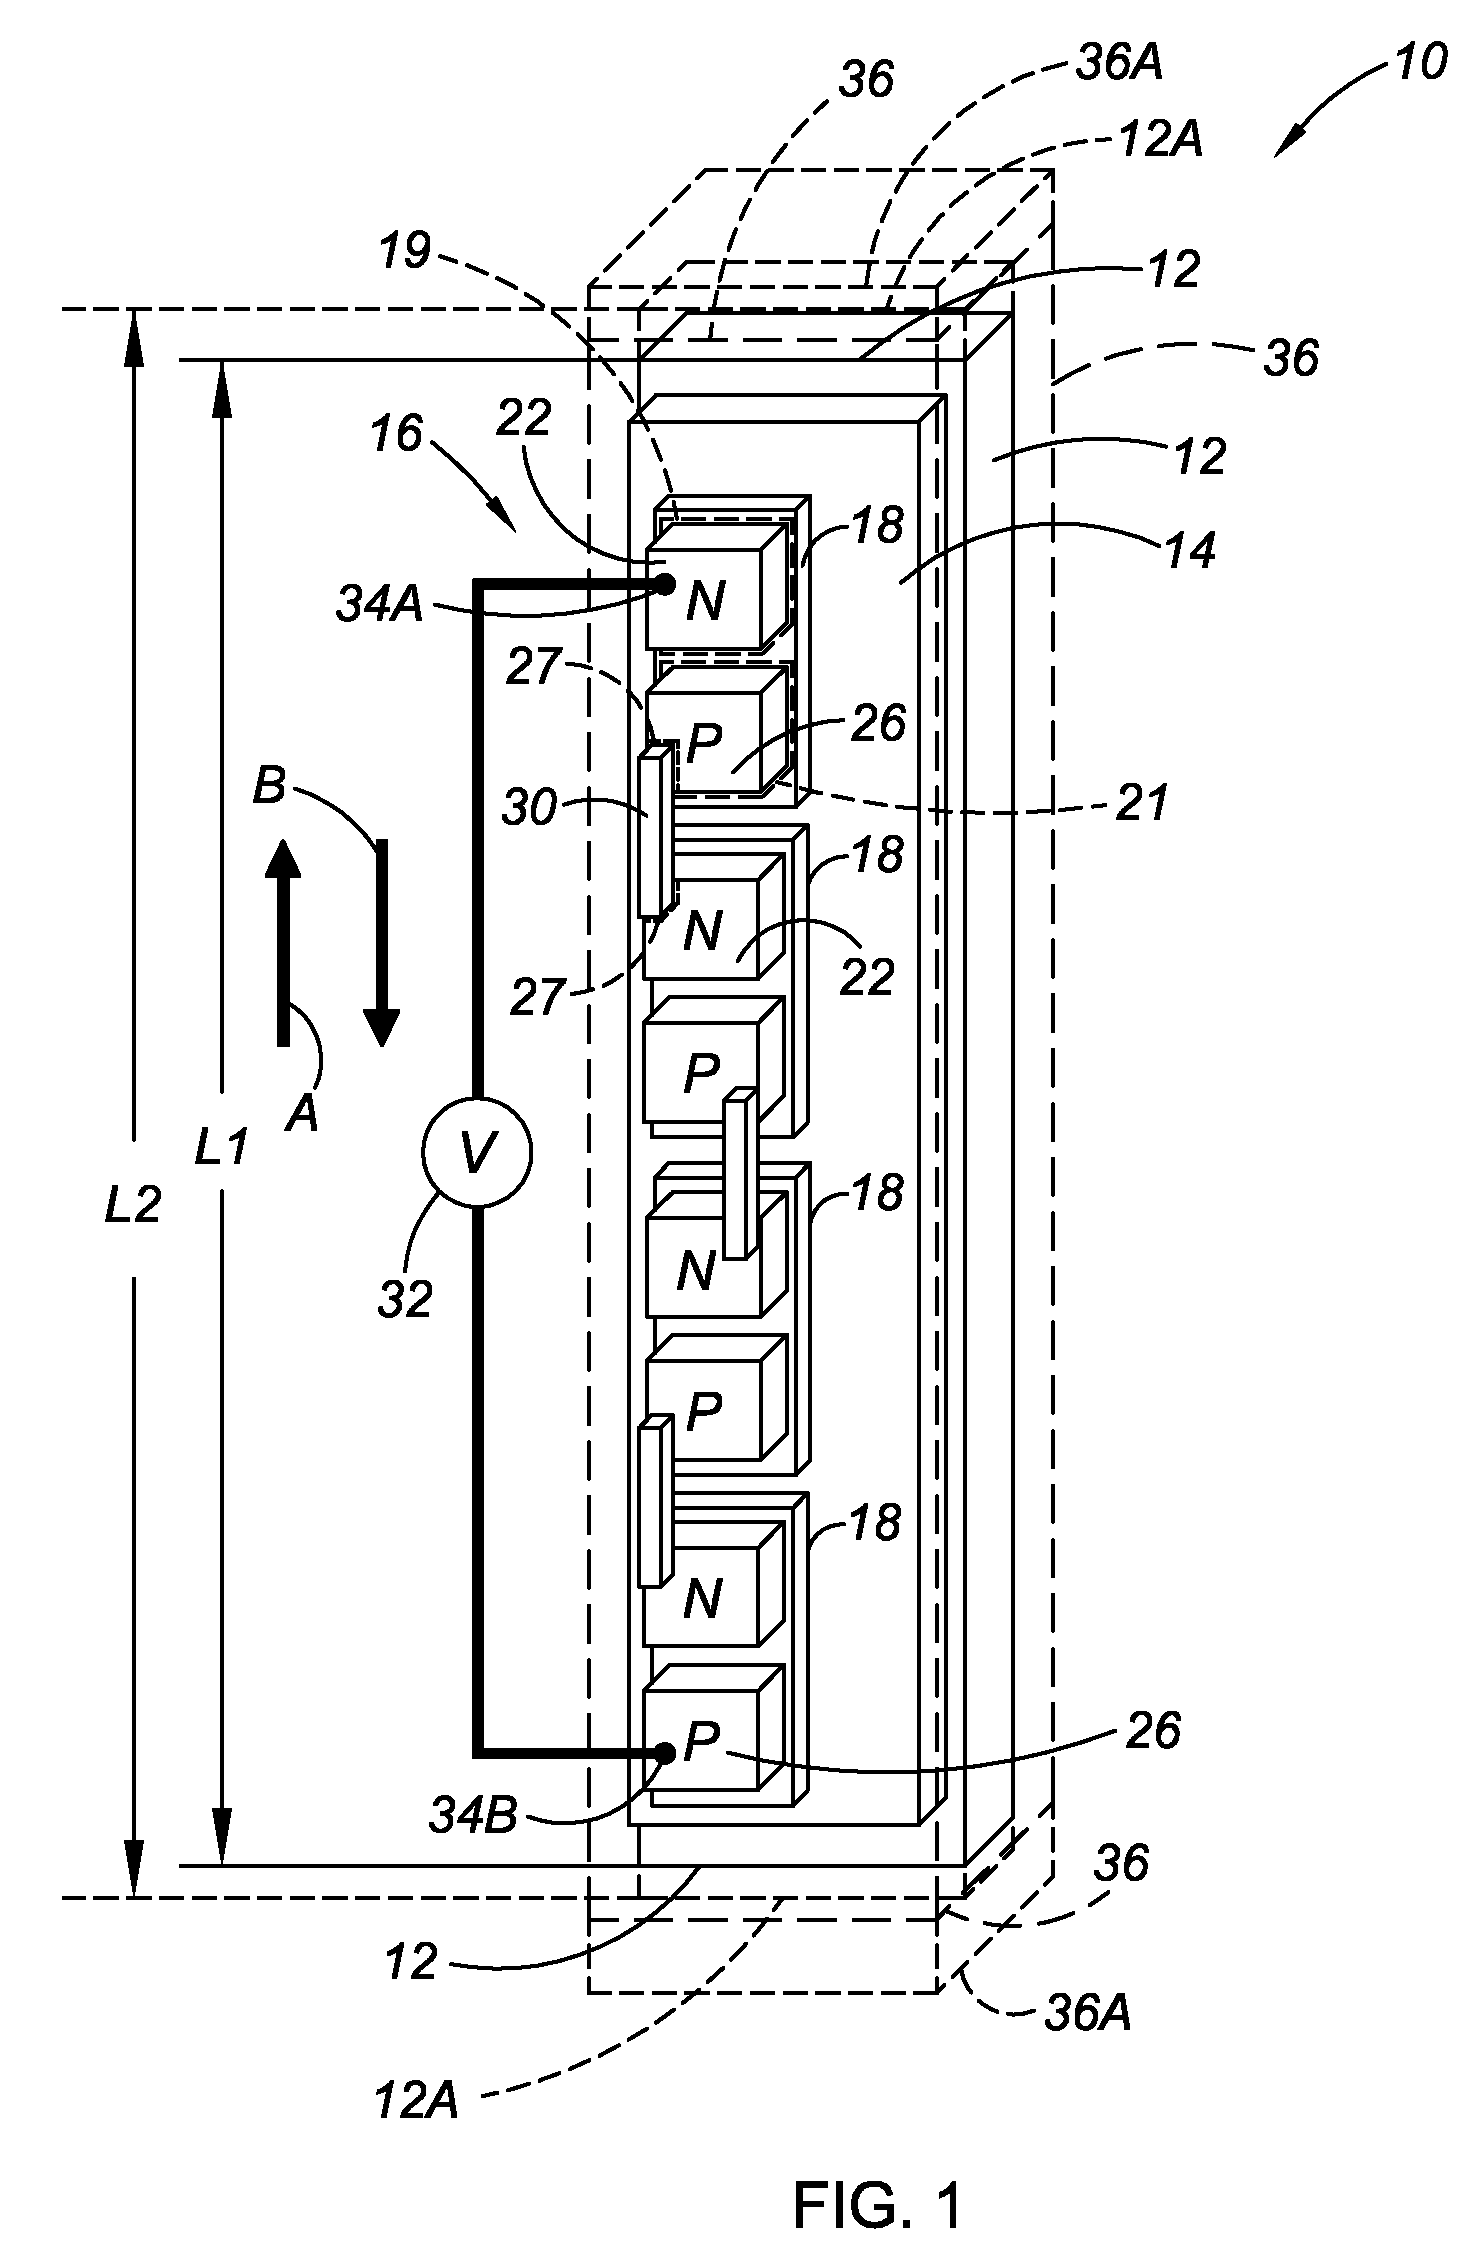 Active material apparatus with activating thermoelectric device thereon and method of fabrication